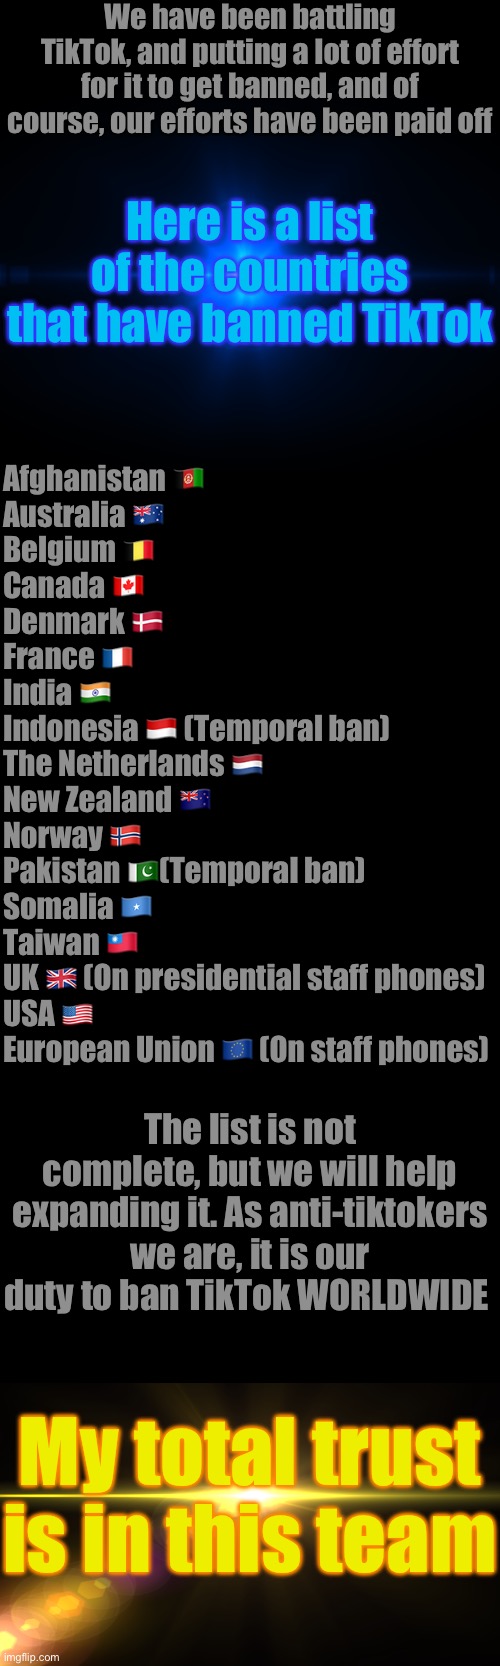 We have been battling TikTok, and putting a lot of effort for it to get banned, and of course, our efforts have been paid off; Here is a list of the countries that have banned TikTok; Afghanistan 🇦🇫 
Australia 🇦🇺 
Belgium 🇧🇪 
Canada 🇨🇦 
Denmark 🇩🇰 
France 🇫🇷 
India 🇮🇳 
Indonesia 🇮🇩 (Temporal ban)
The Netherlands 🇳🇱 
New Zealand 🇳🇿 
Norway 🇳🇴 
Pakistan 🇵🇰(Temporal ban)
Somalia 🇸🇴 
Taiwan 🇹🇼 
UK 🇬🇧 (On presidential staff phones)
USA 🇺🇸 
European Union 🇪🇺 (On staff phones); The list is not complete, but we will help expanding it. As anti-tiktokers we are, it is our duty to ban TikTok WORLDWIDE; My total trust is in this team | made w/ Imgflip meme maker